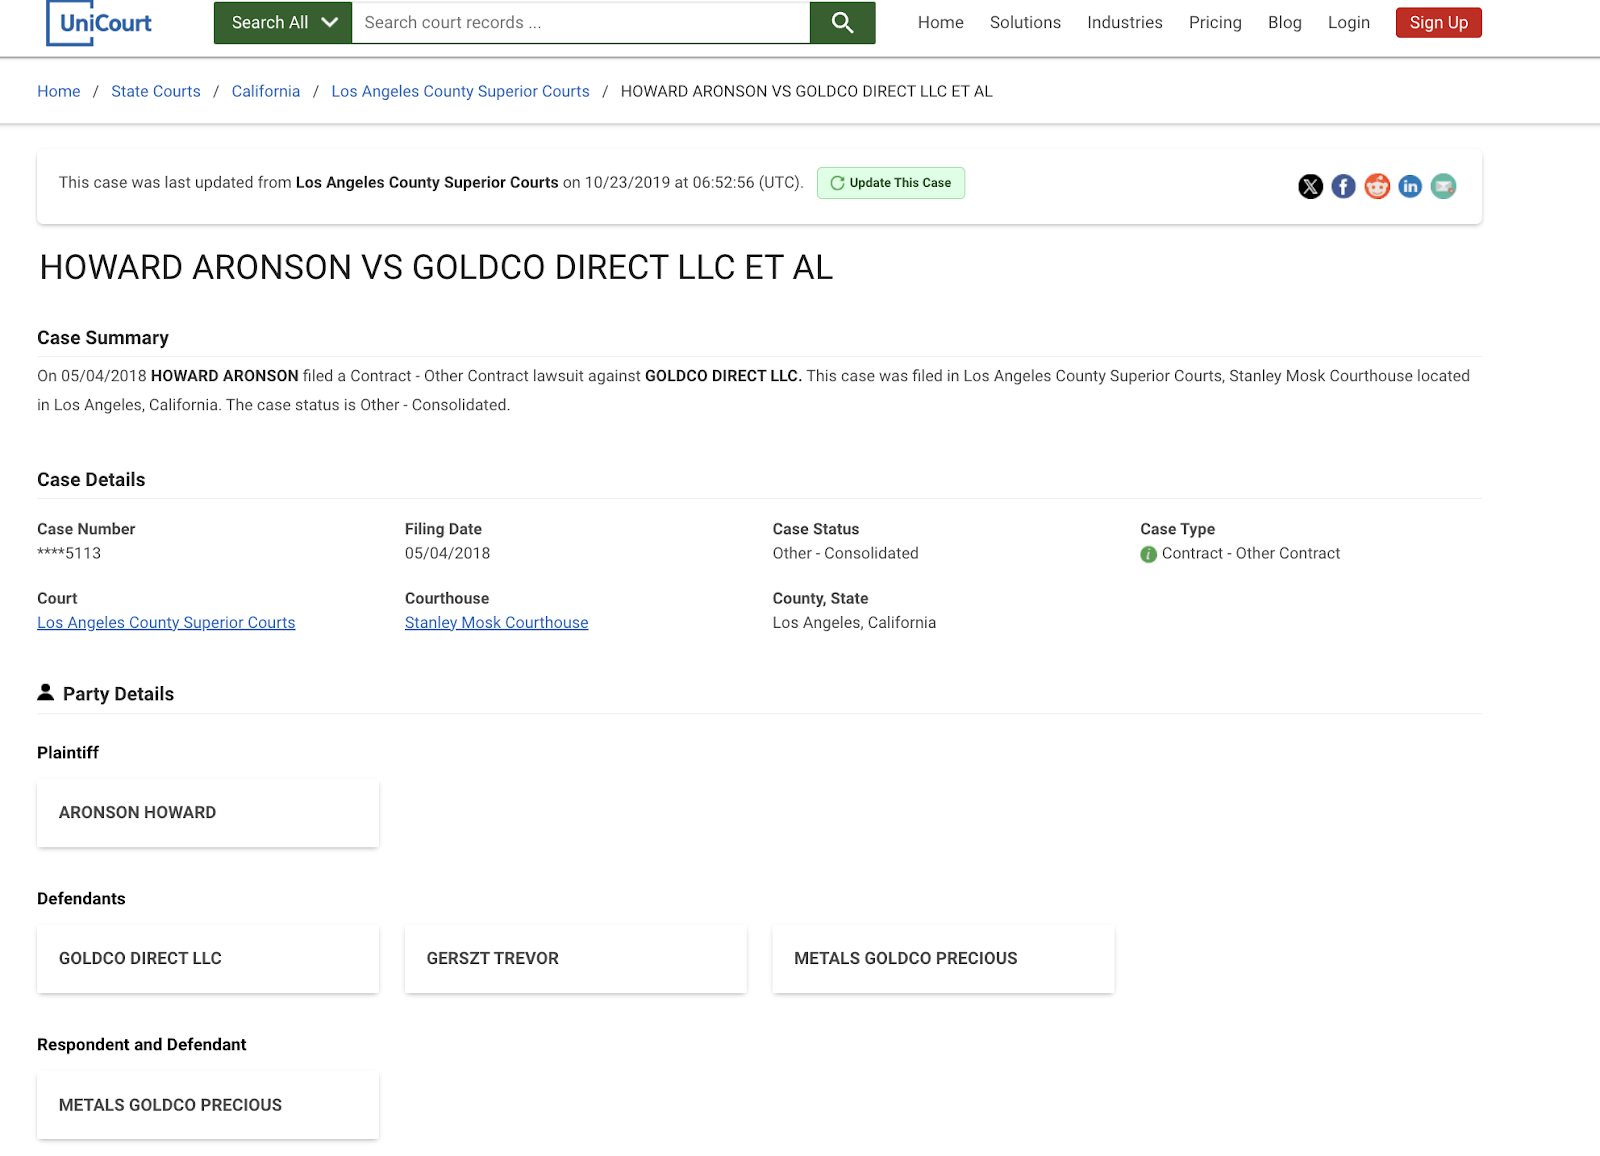 Goldco lawsuit example 1